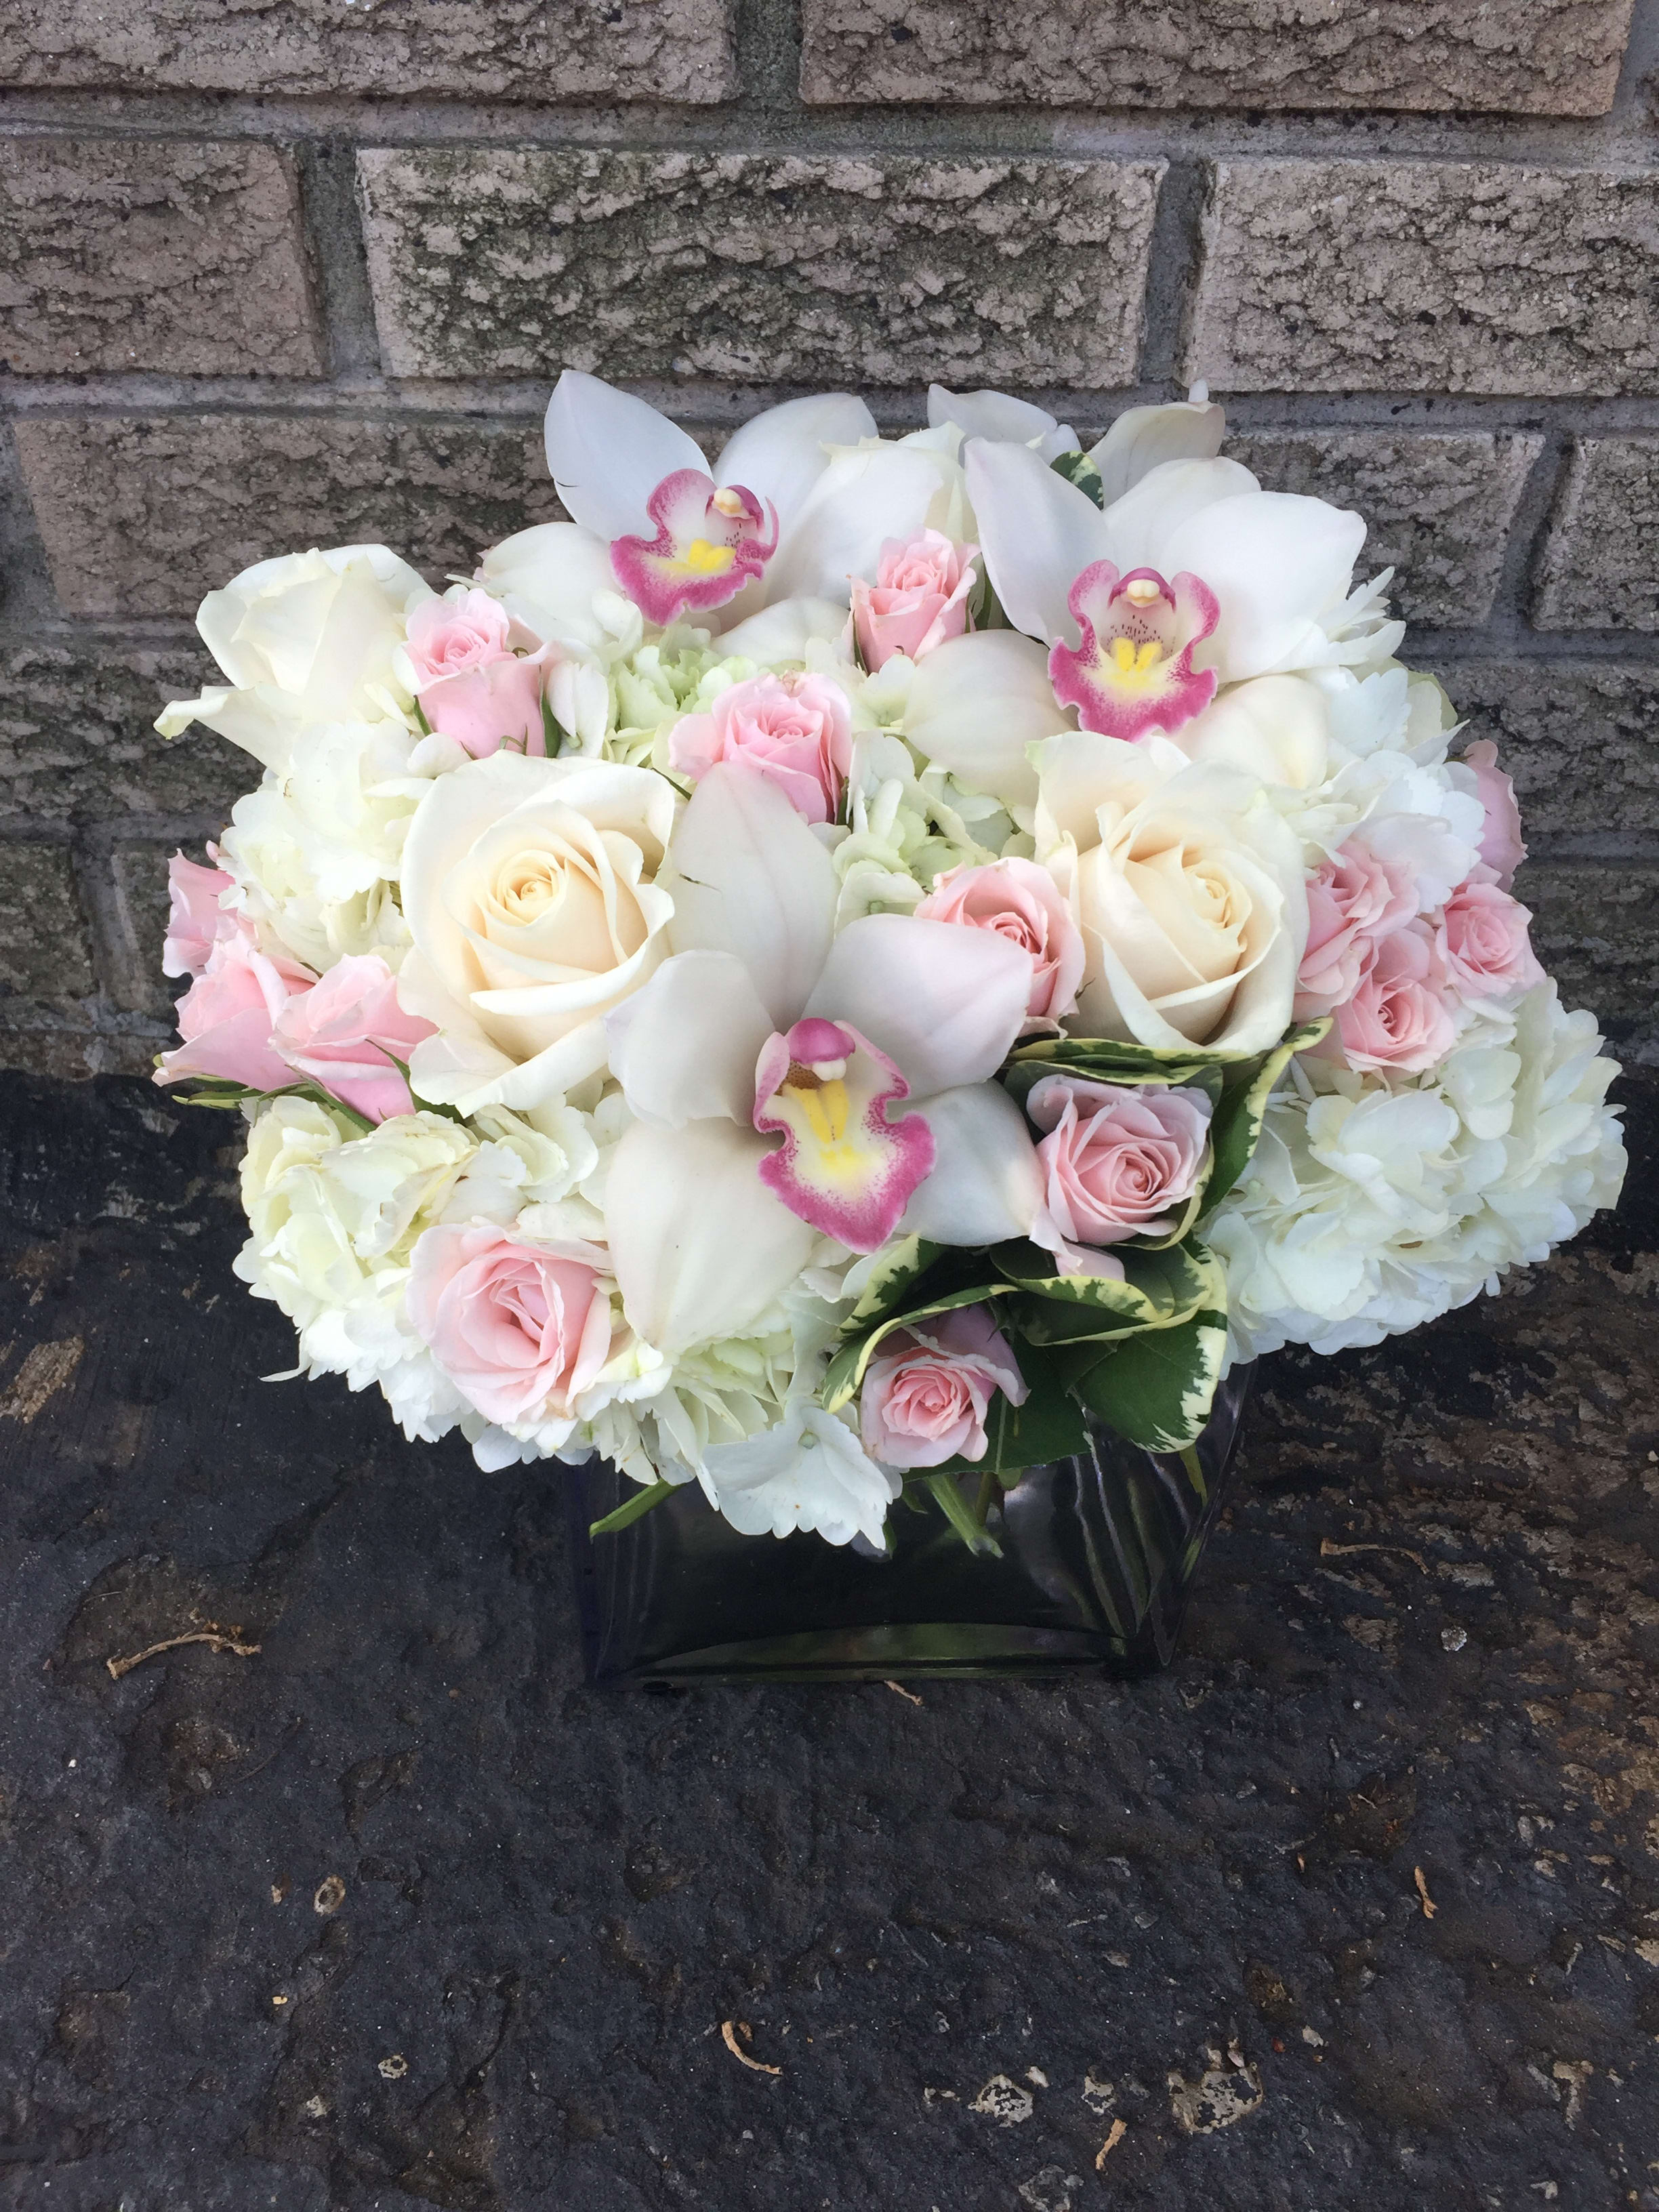 With Love  - Cube vase with white hydrangea, White cymbidium orchids light pink roses. 